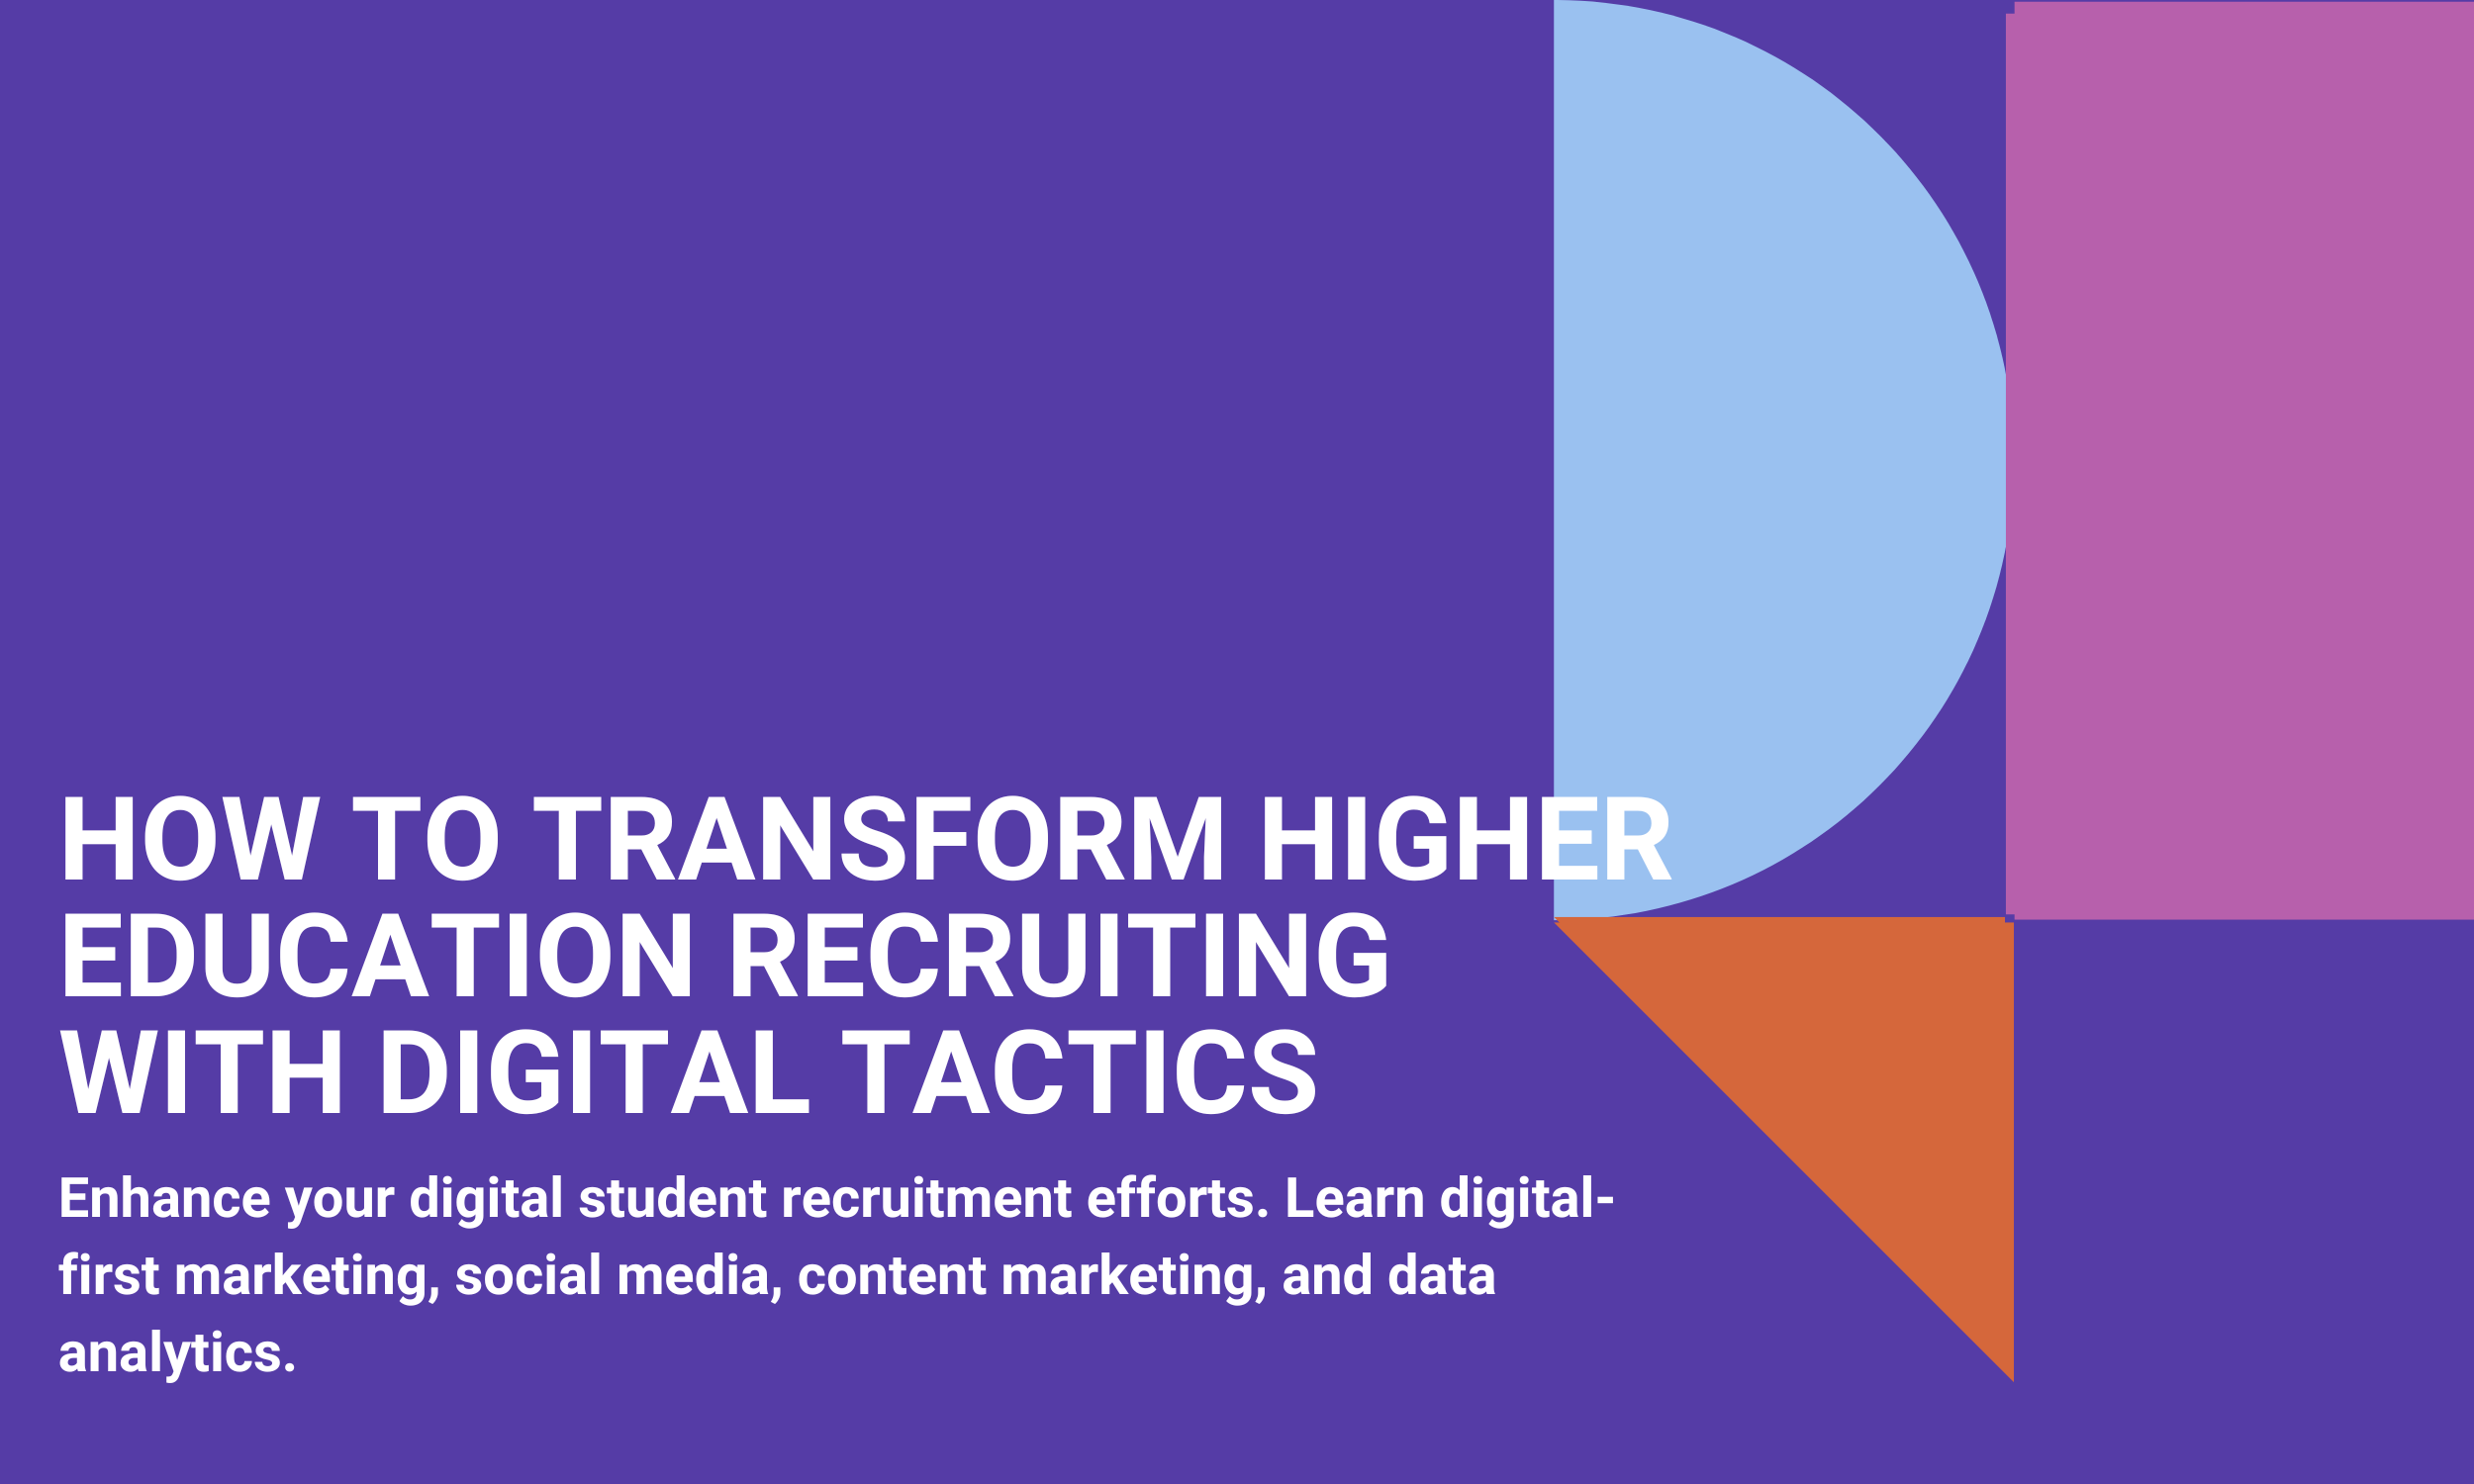 How to Transform Higher Education Recruiting with Digital Tactics